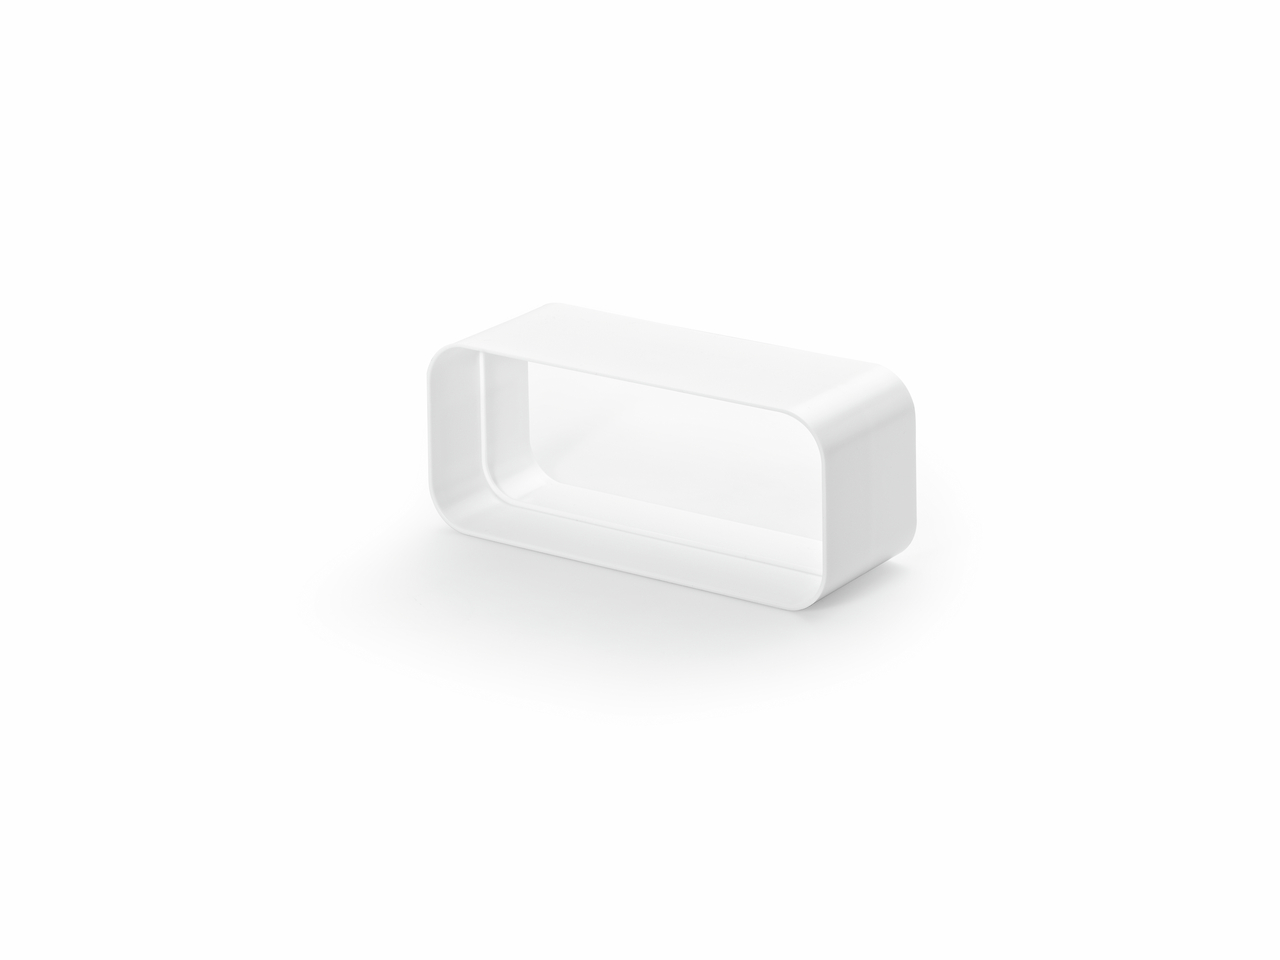  F-RVB pipe connector, white